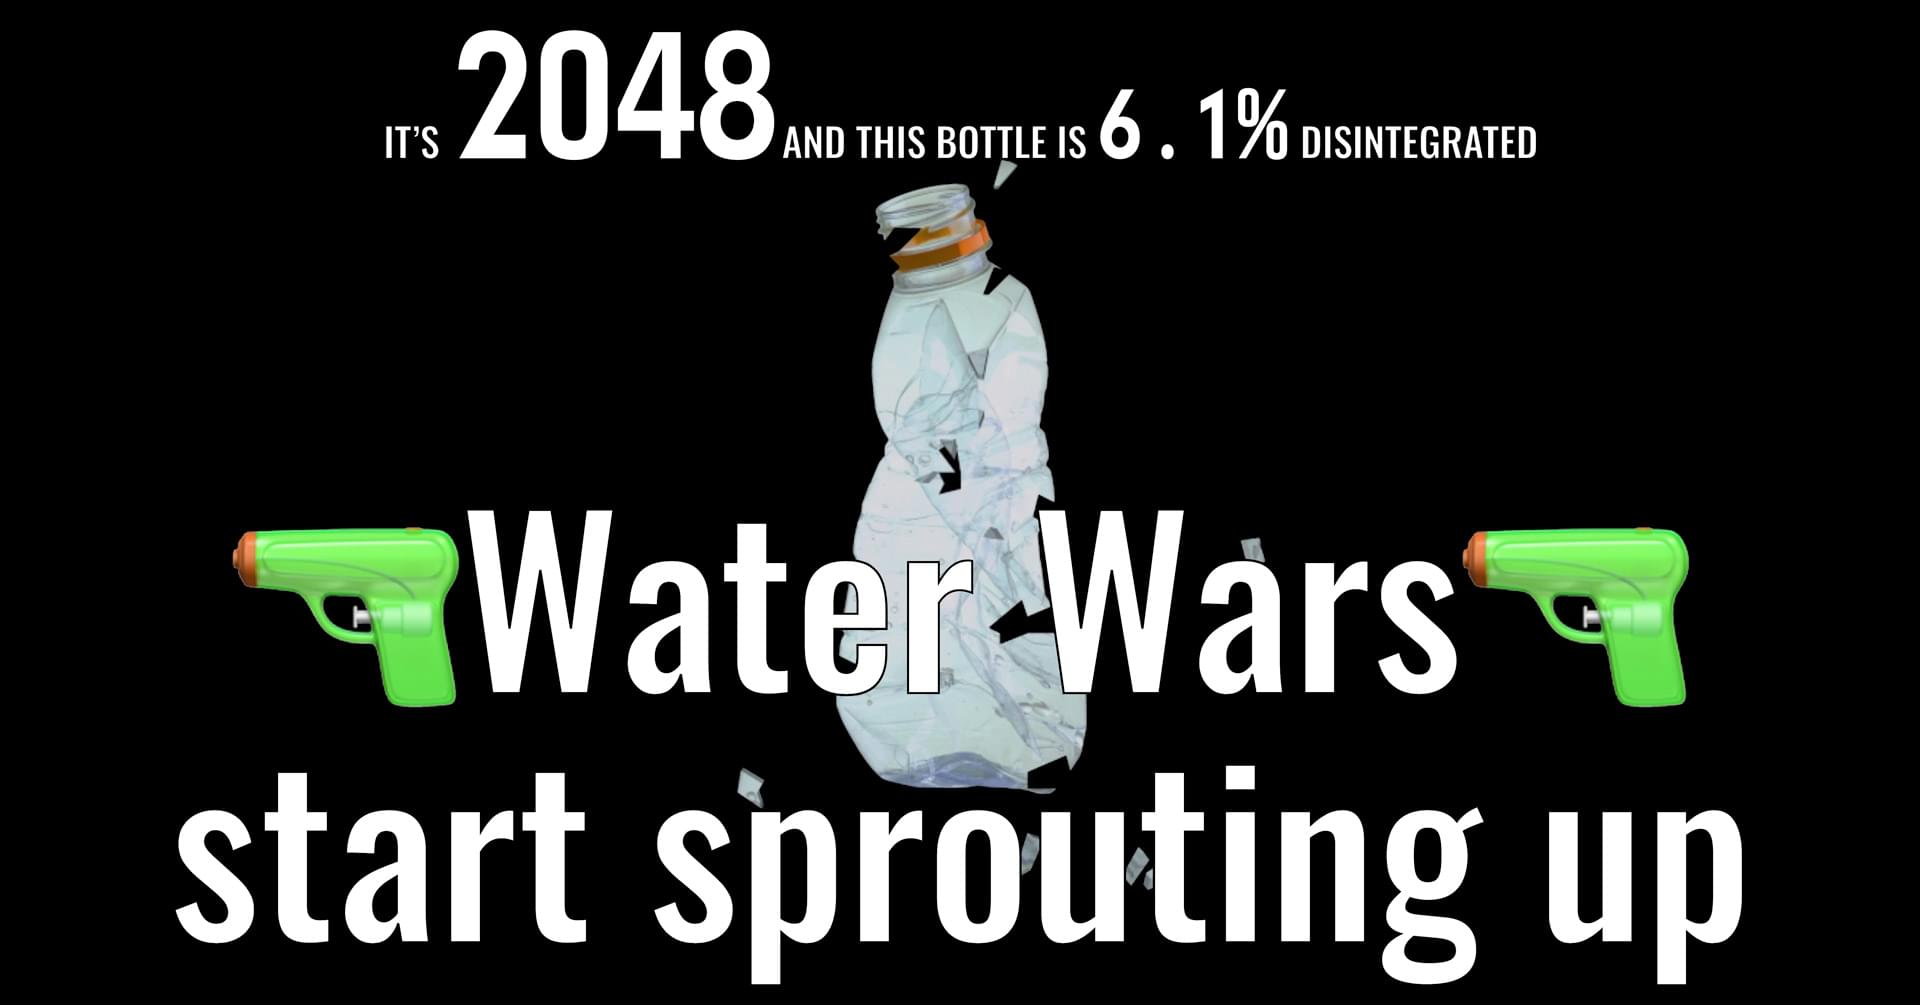 Screenshot that says "It is 2048 and this bottle is 6.1% disintegrated" on top; in the middle of the image is a photograph of a plastic bottle, and on the bottom is the text "Water Wars sprout up everwhere" sandwitched between two gun emojis; black background